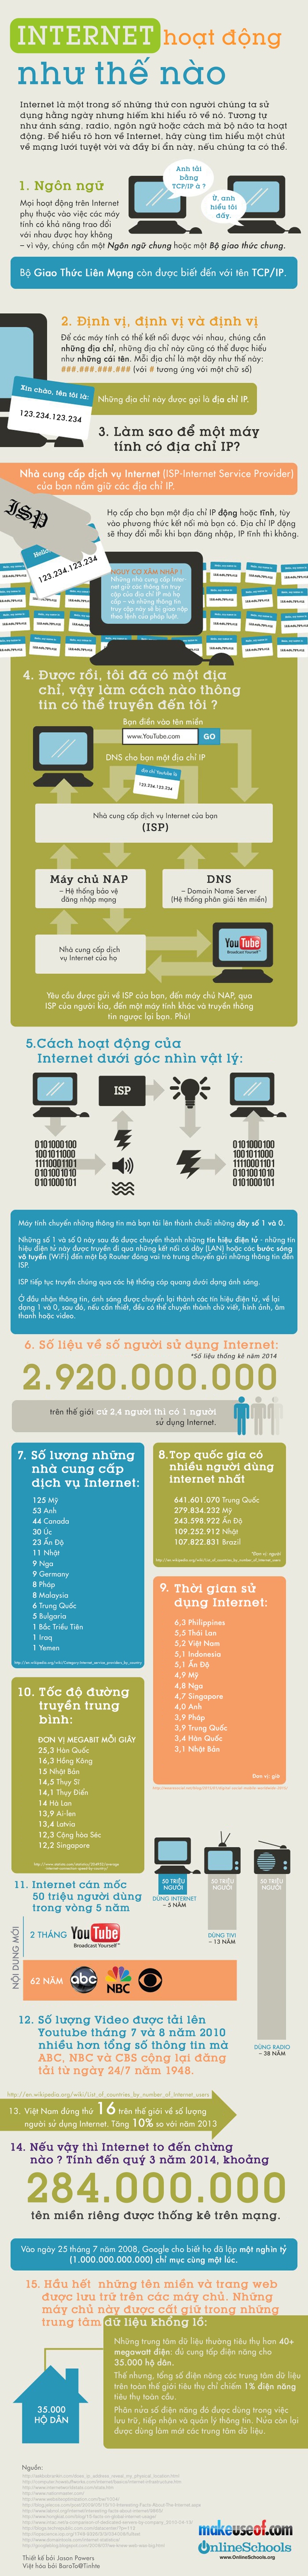 [Infographic] Internet hoat dong nhu the nao.